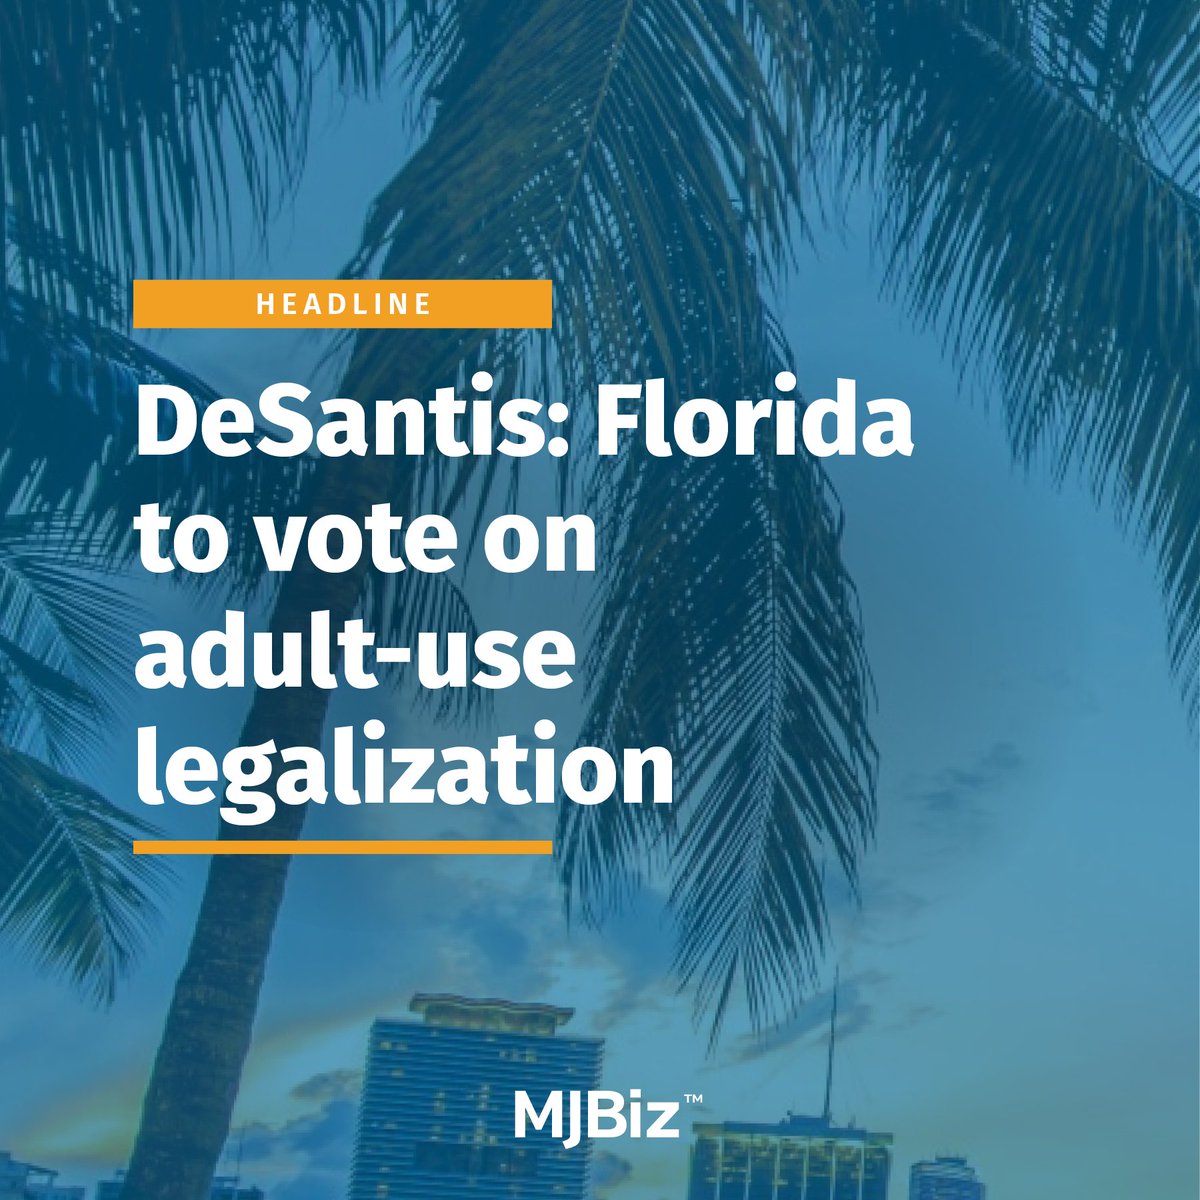 #Florida voters will likely see #marijuana legalization on their presidential election ballots this fall. Read the full story: bit.ly/3HsqdCn (Photo by littleny/stock.adobe.com)